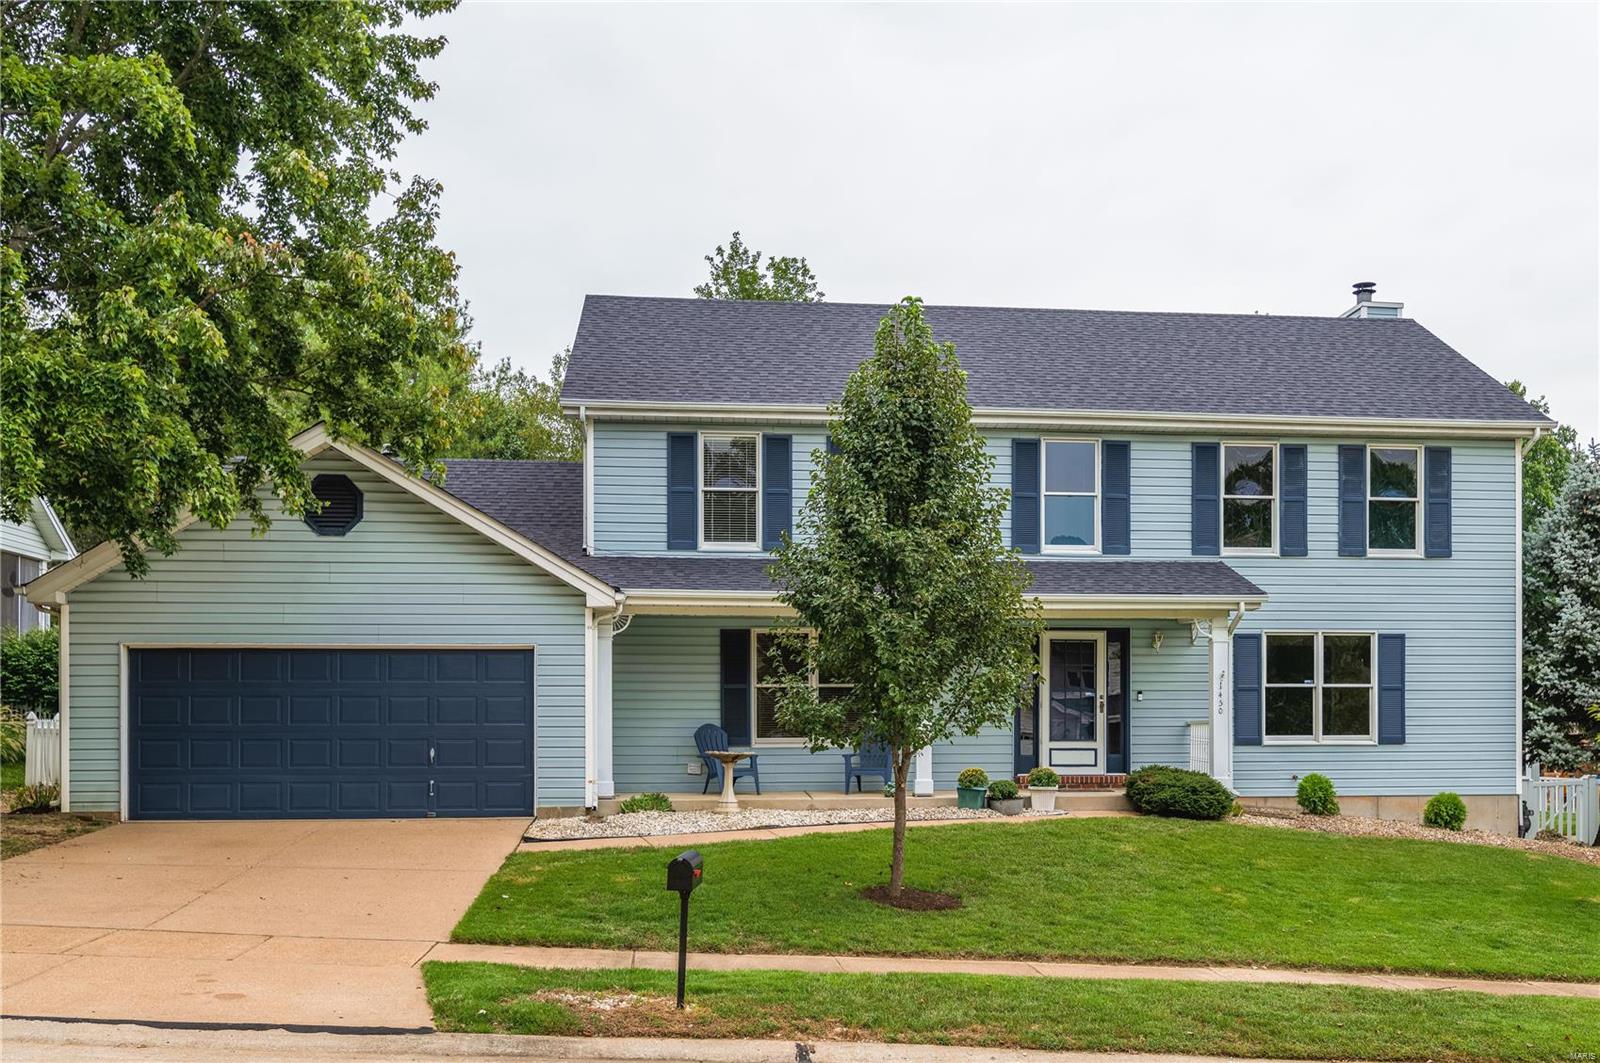 RedKey Open Houses: Saturday, Sept 28th, 2019